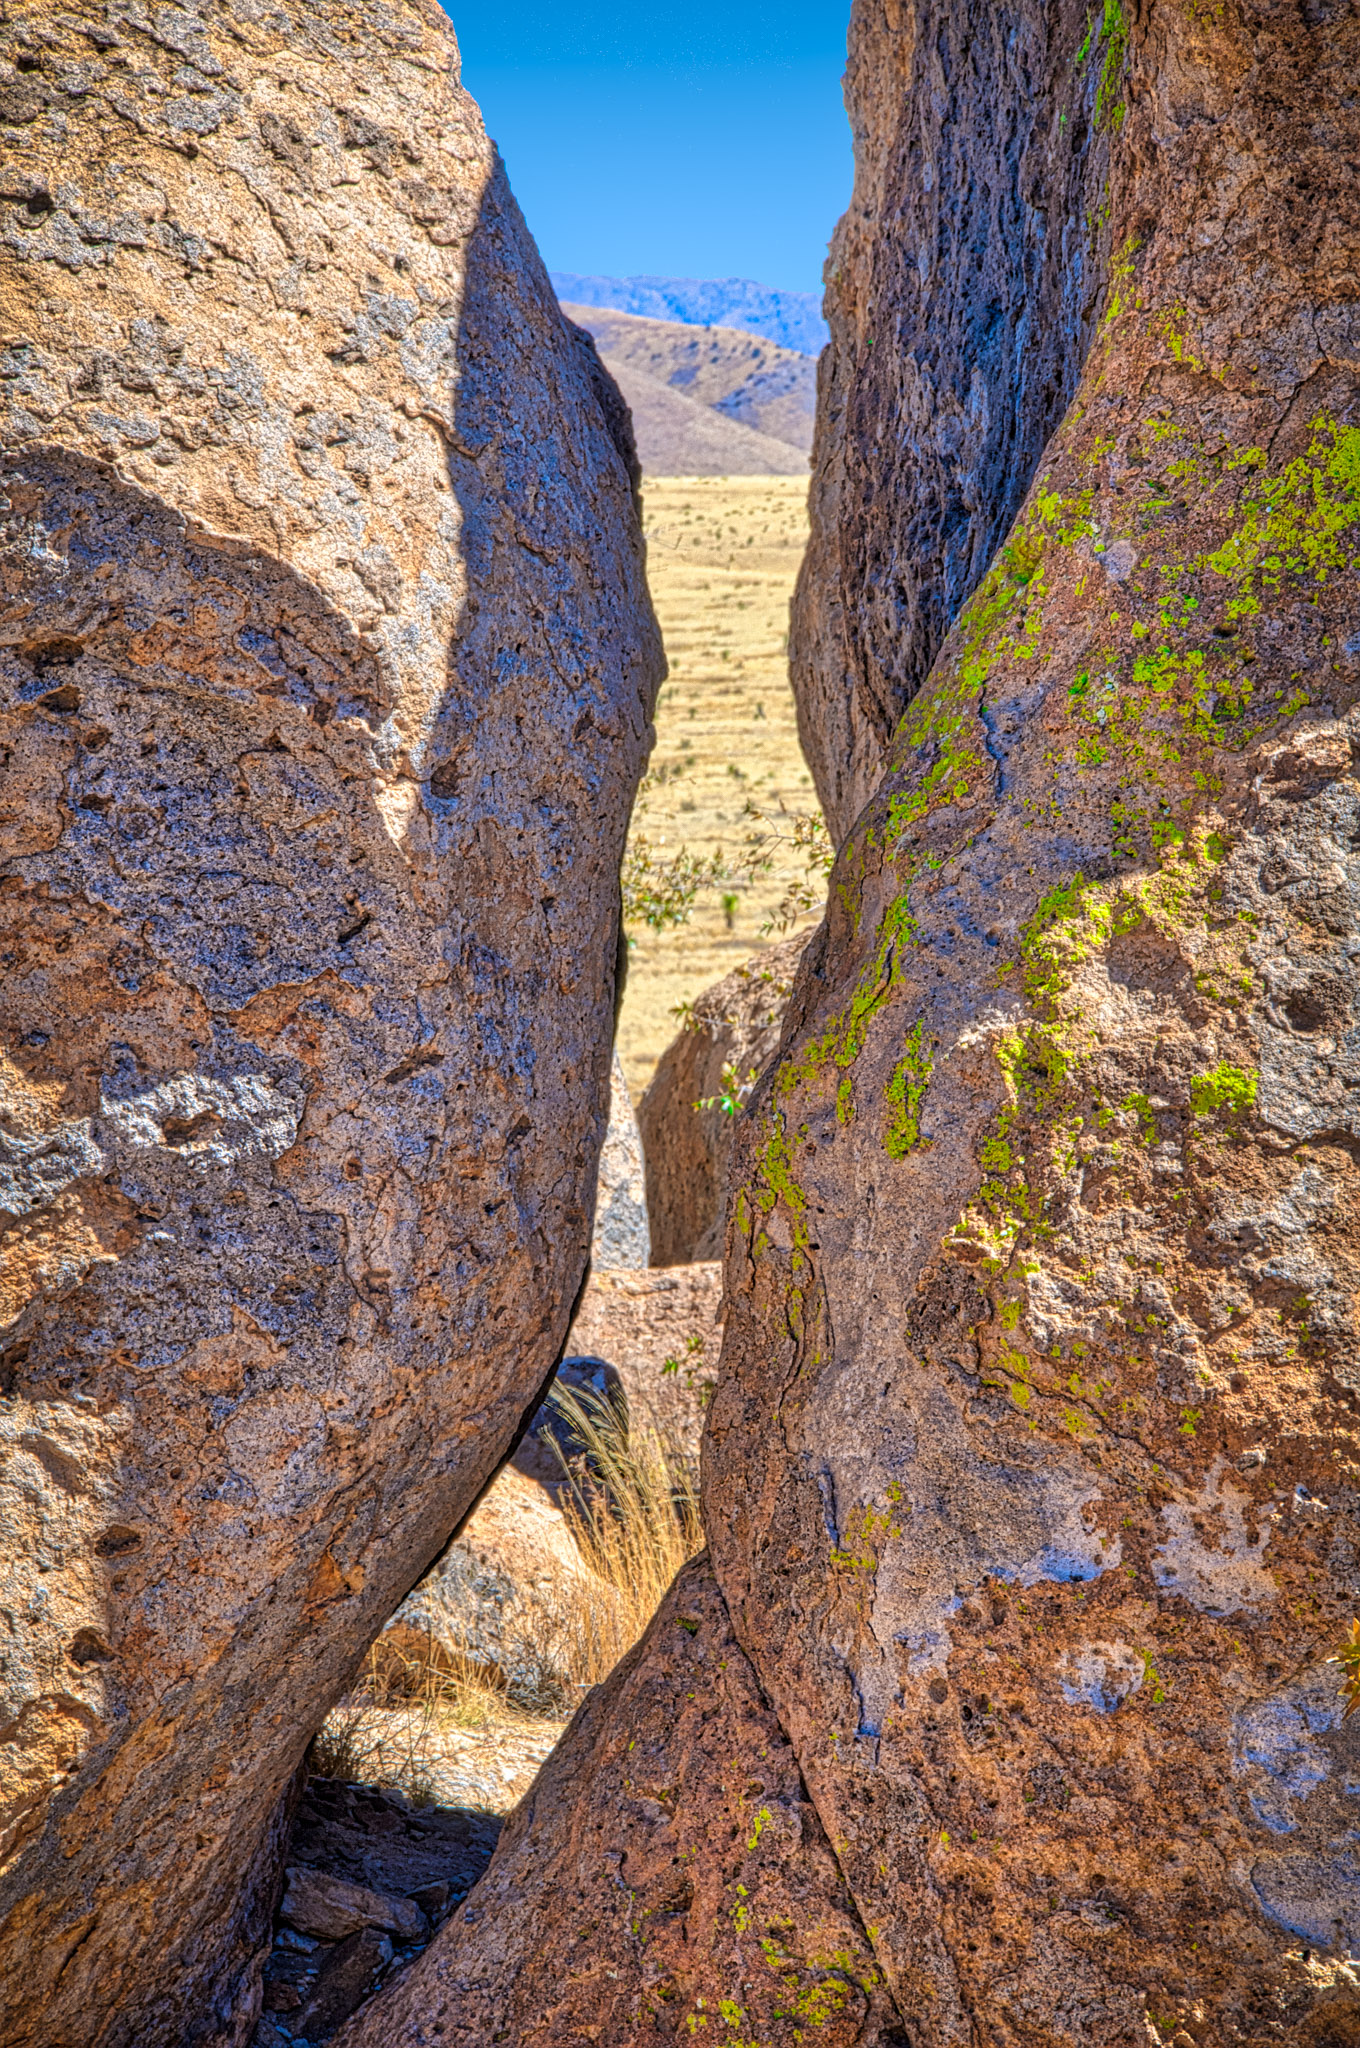 This slit in the rocks provides a view out across the pain to the mountains in the distance. Taken in City of Rocks State Park in southern New Mexico.